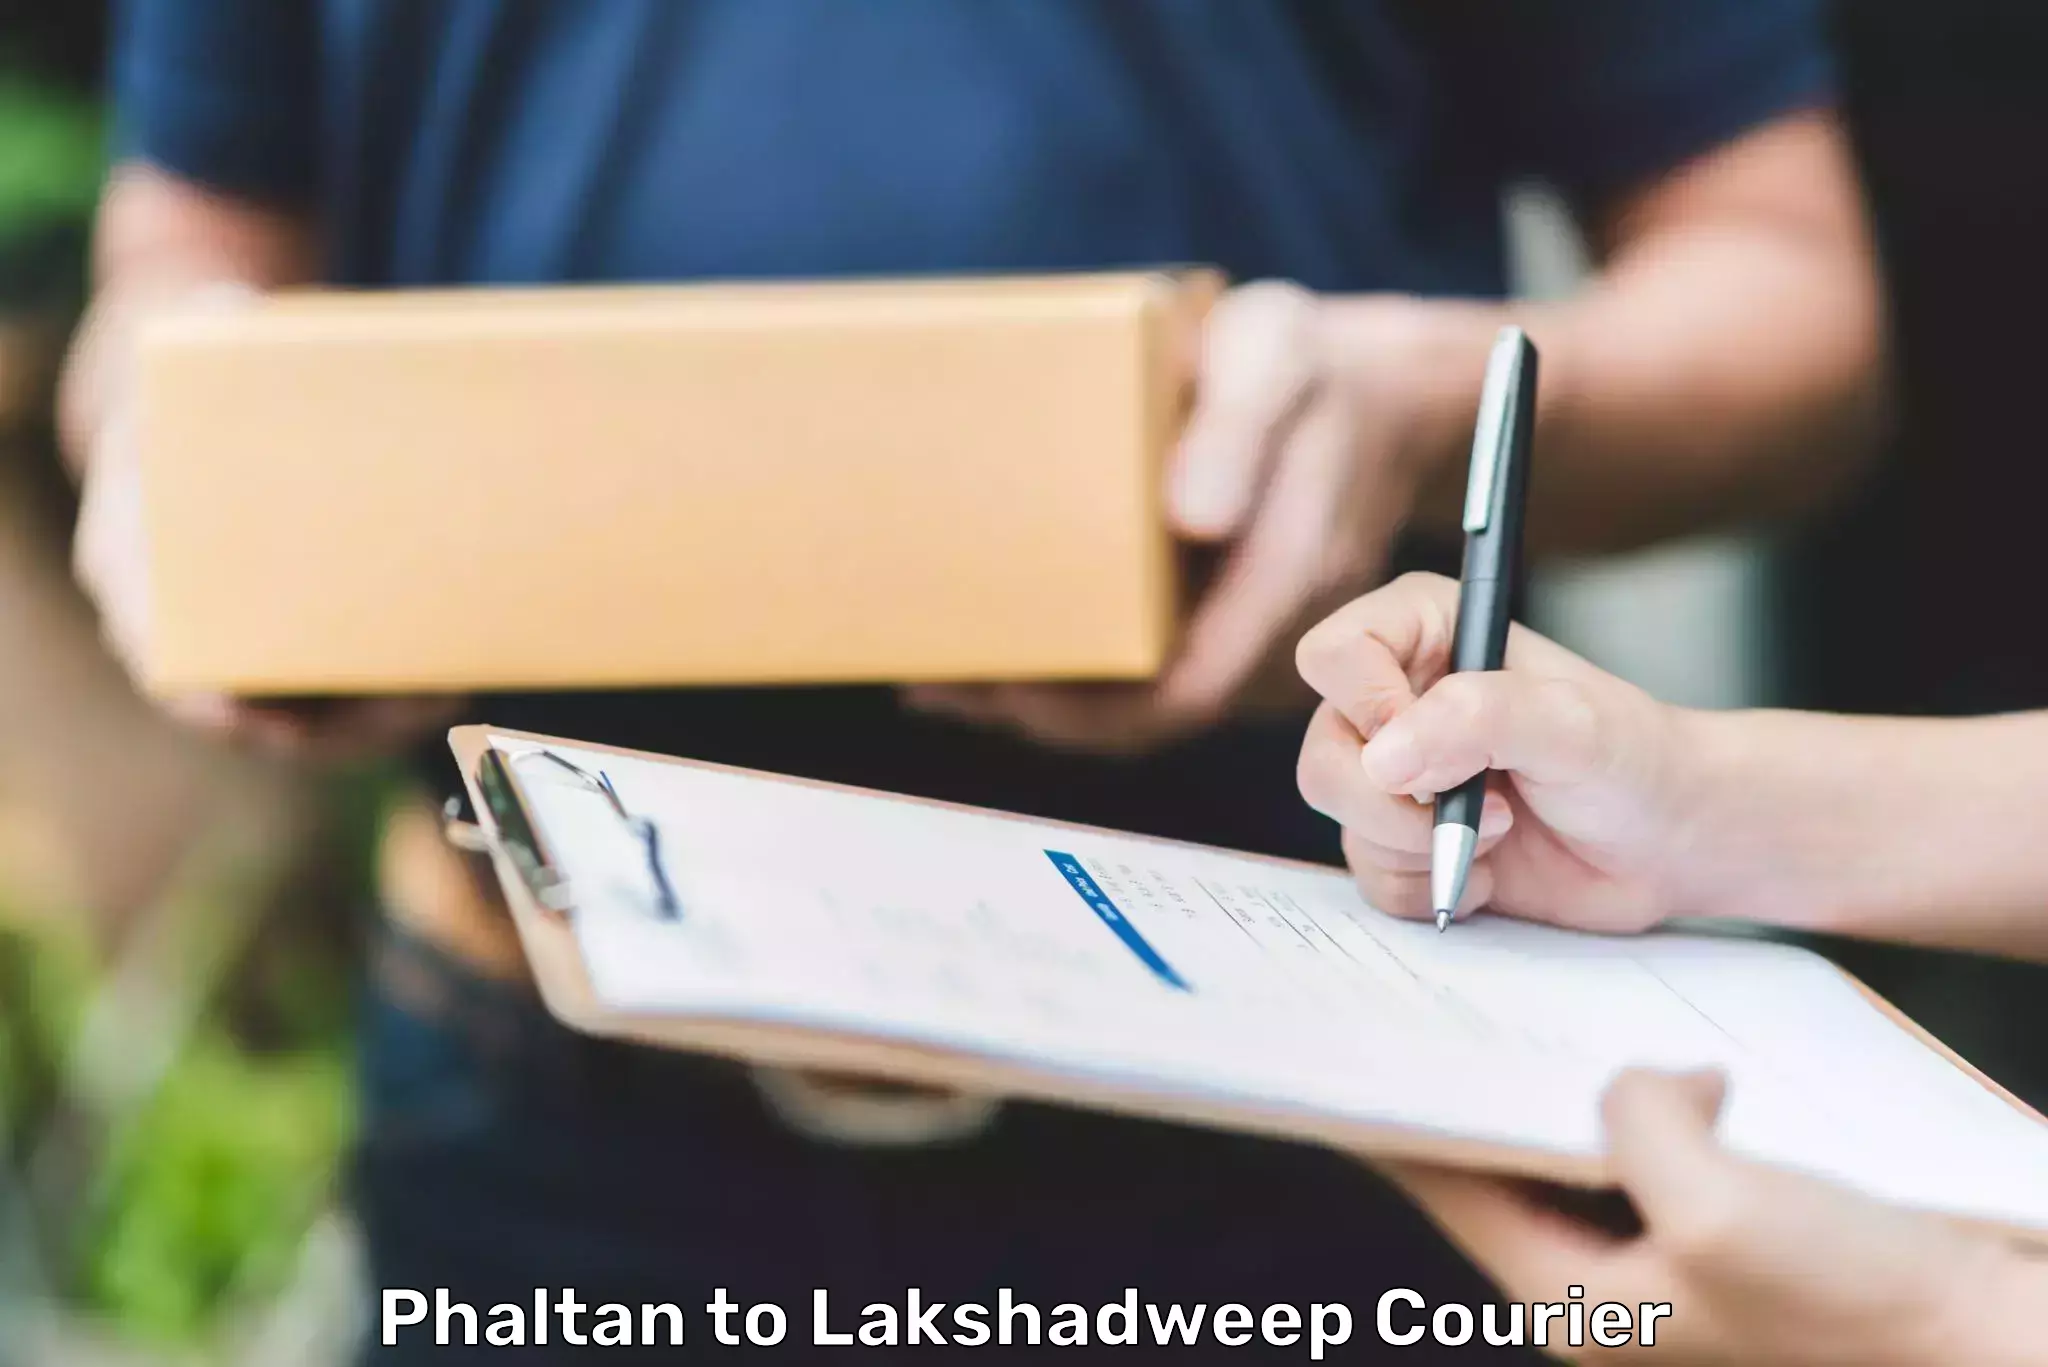 State-of-the-art courier technology Phaltan to Lakshadweep